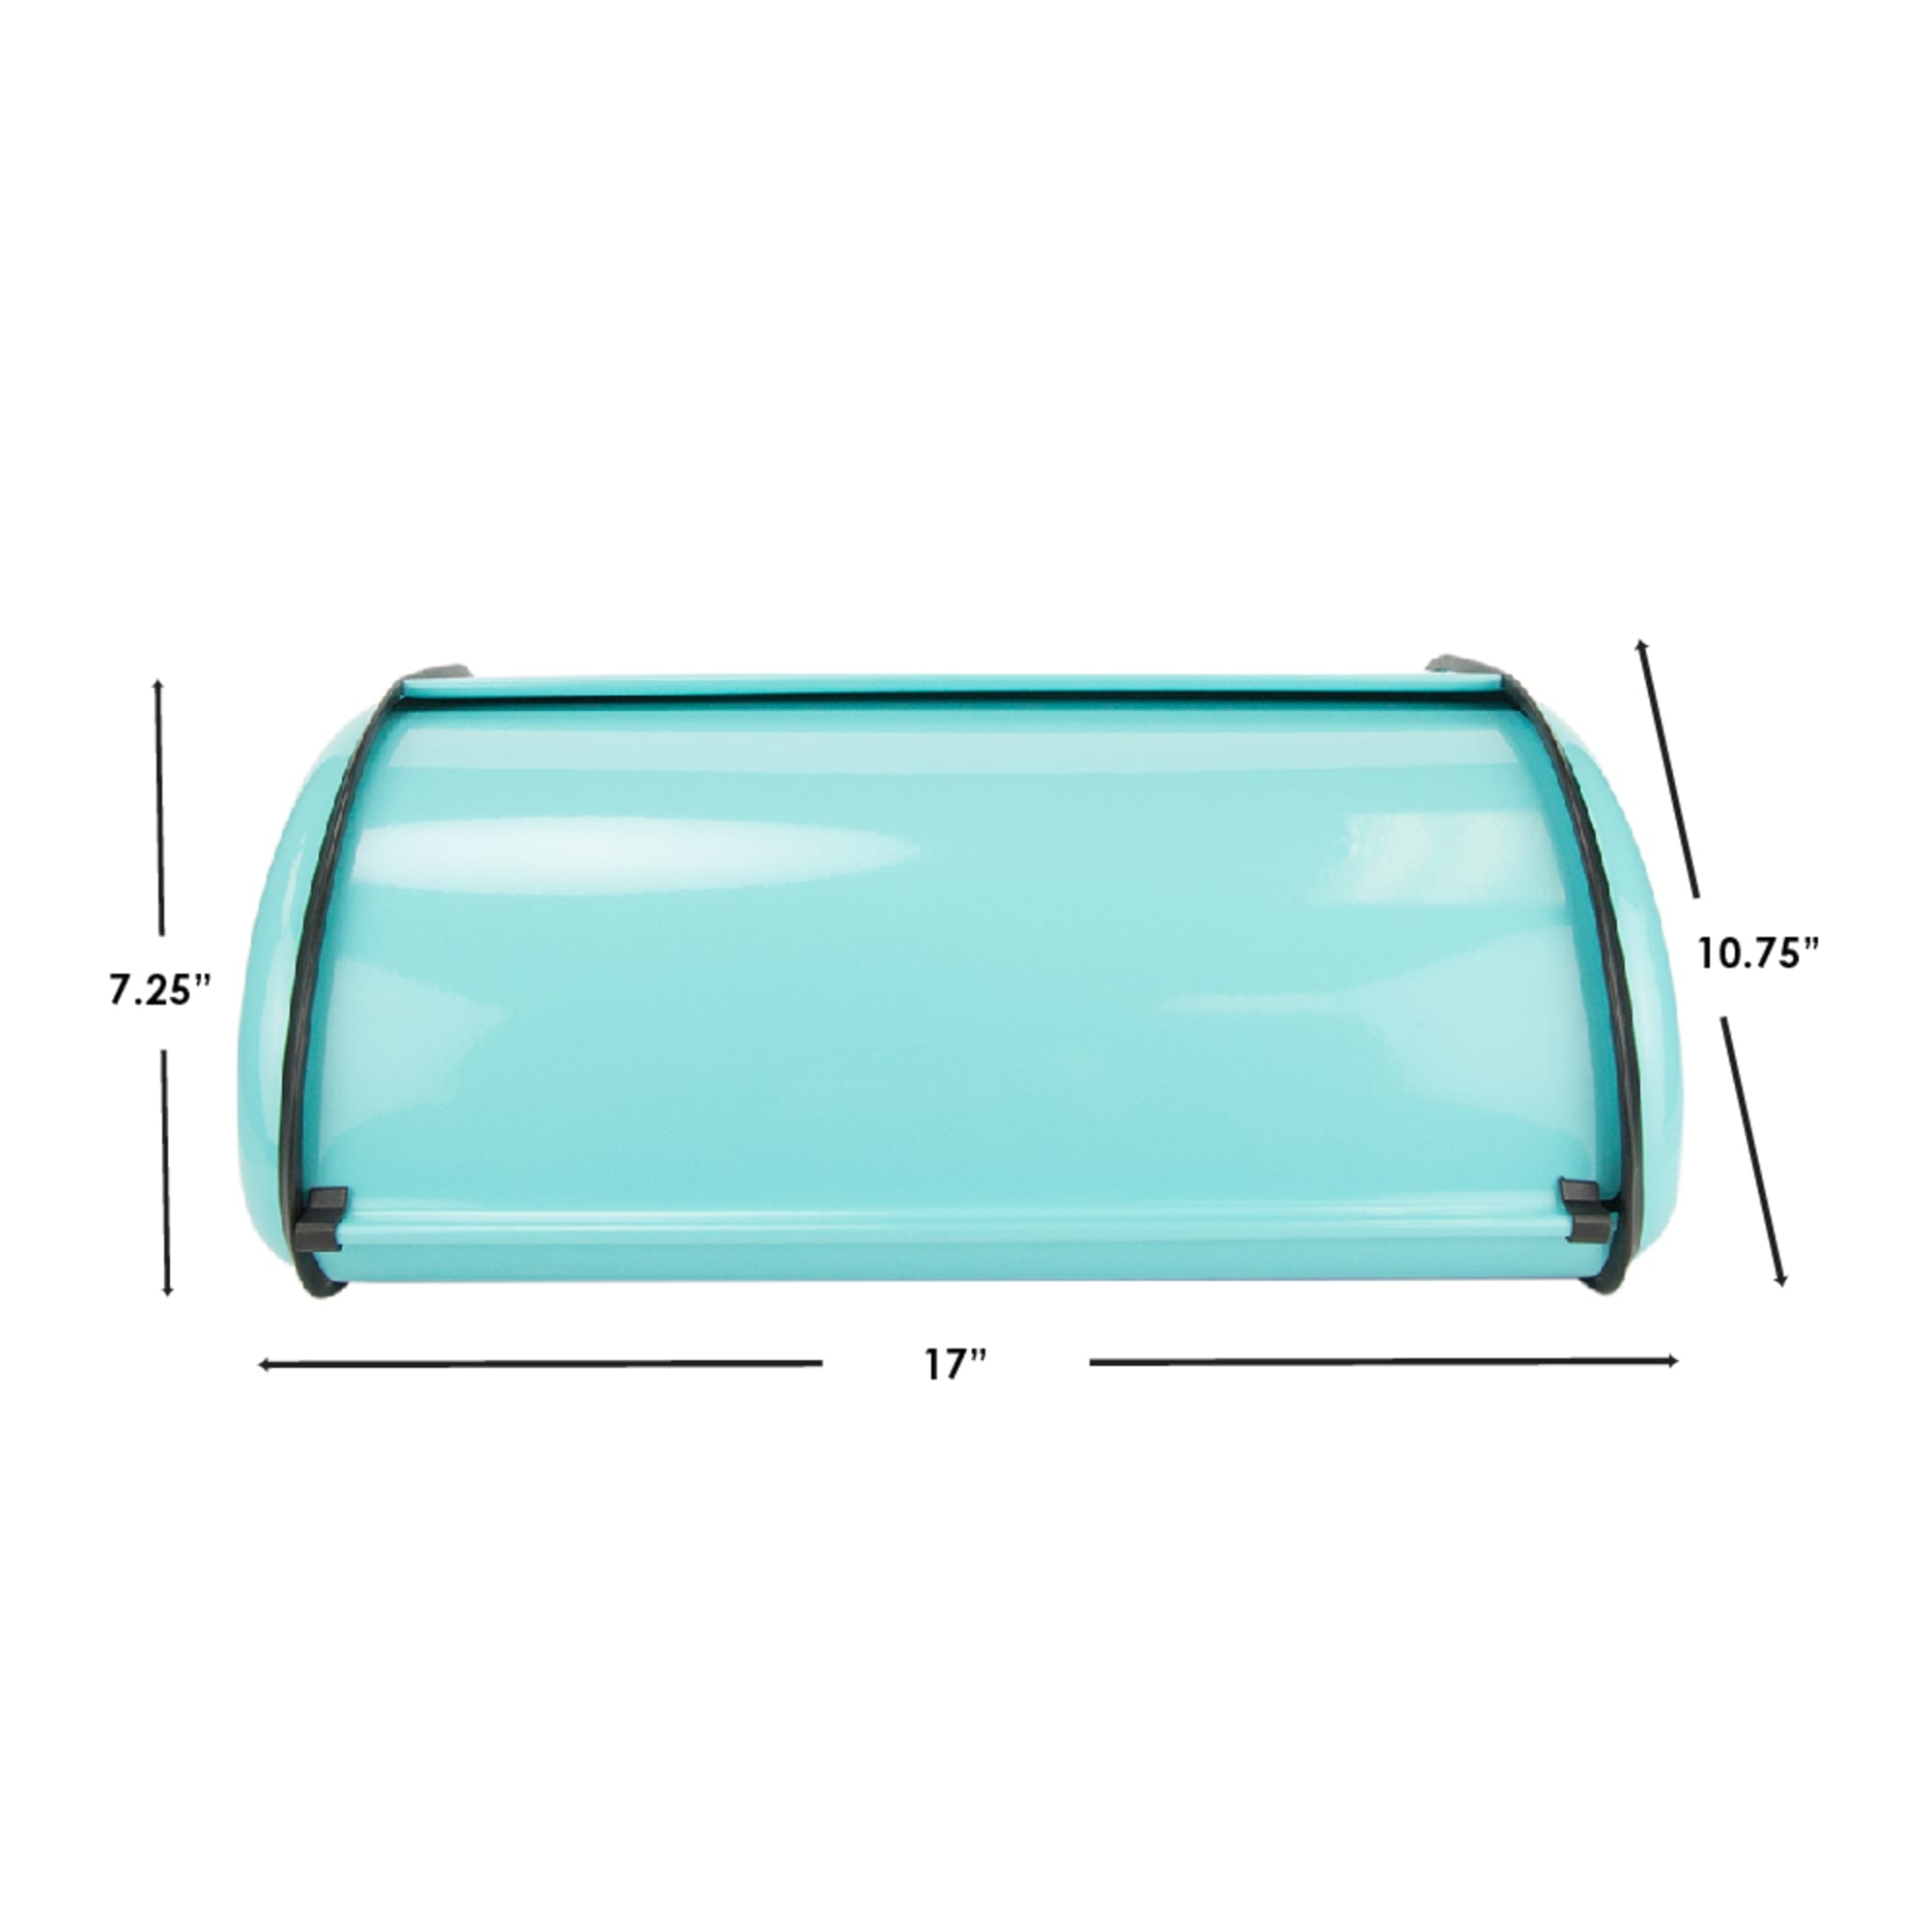 Home Basics Roll Up Lid Metal Bread Box, Turquoise $20.00 EACH, CASE PACK OF 6